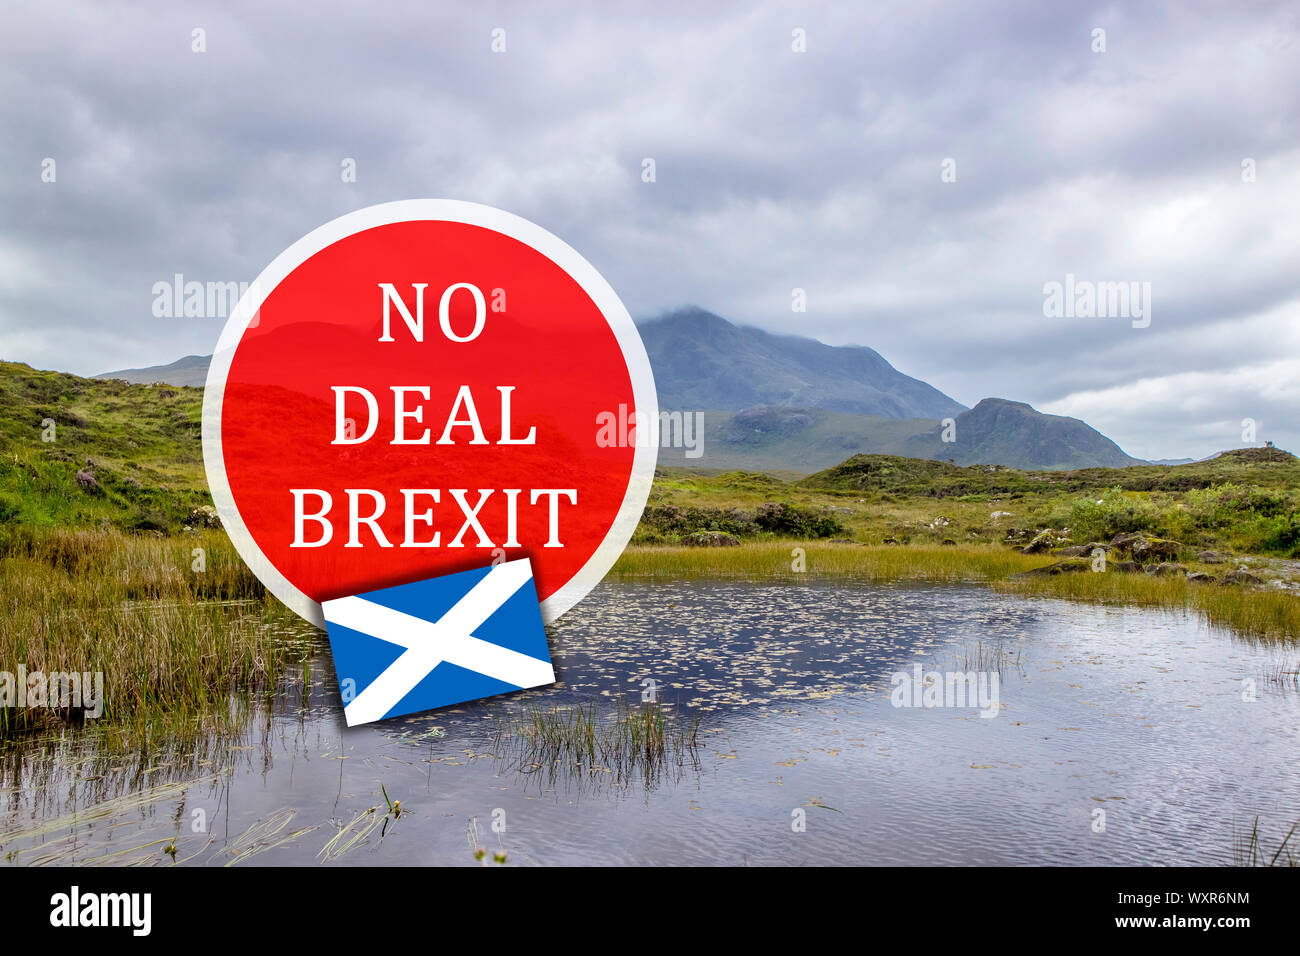 No deal BREXIT in Scotland/Ireland UK concept. Scottish Highland nature background with red warning sign. Stock Photo